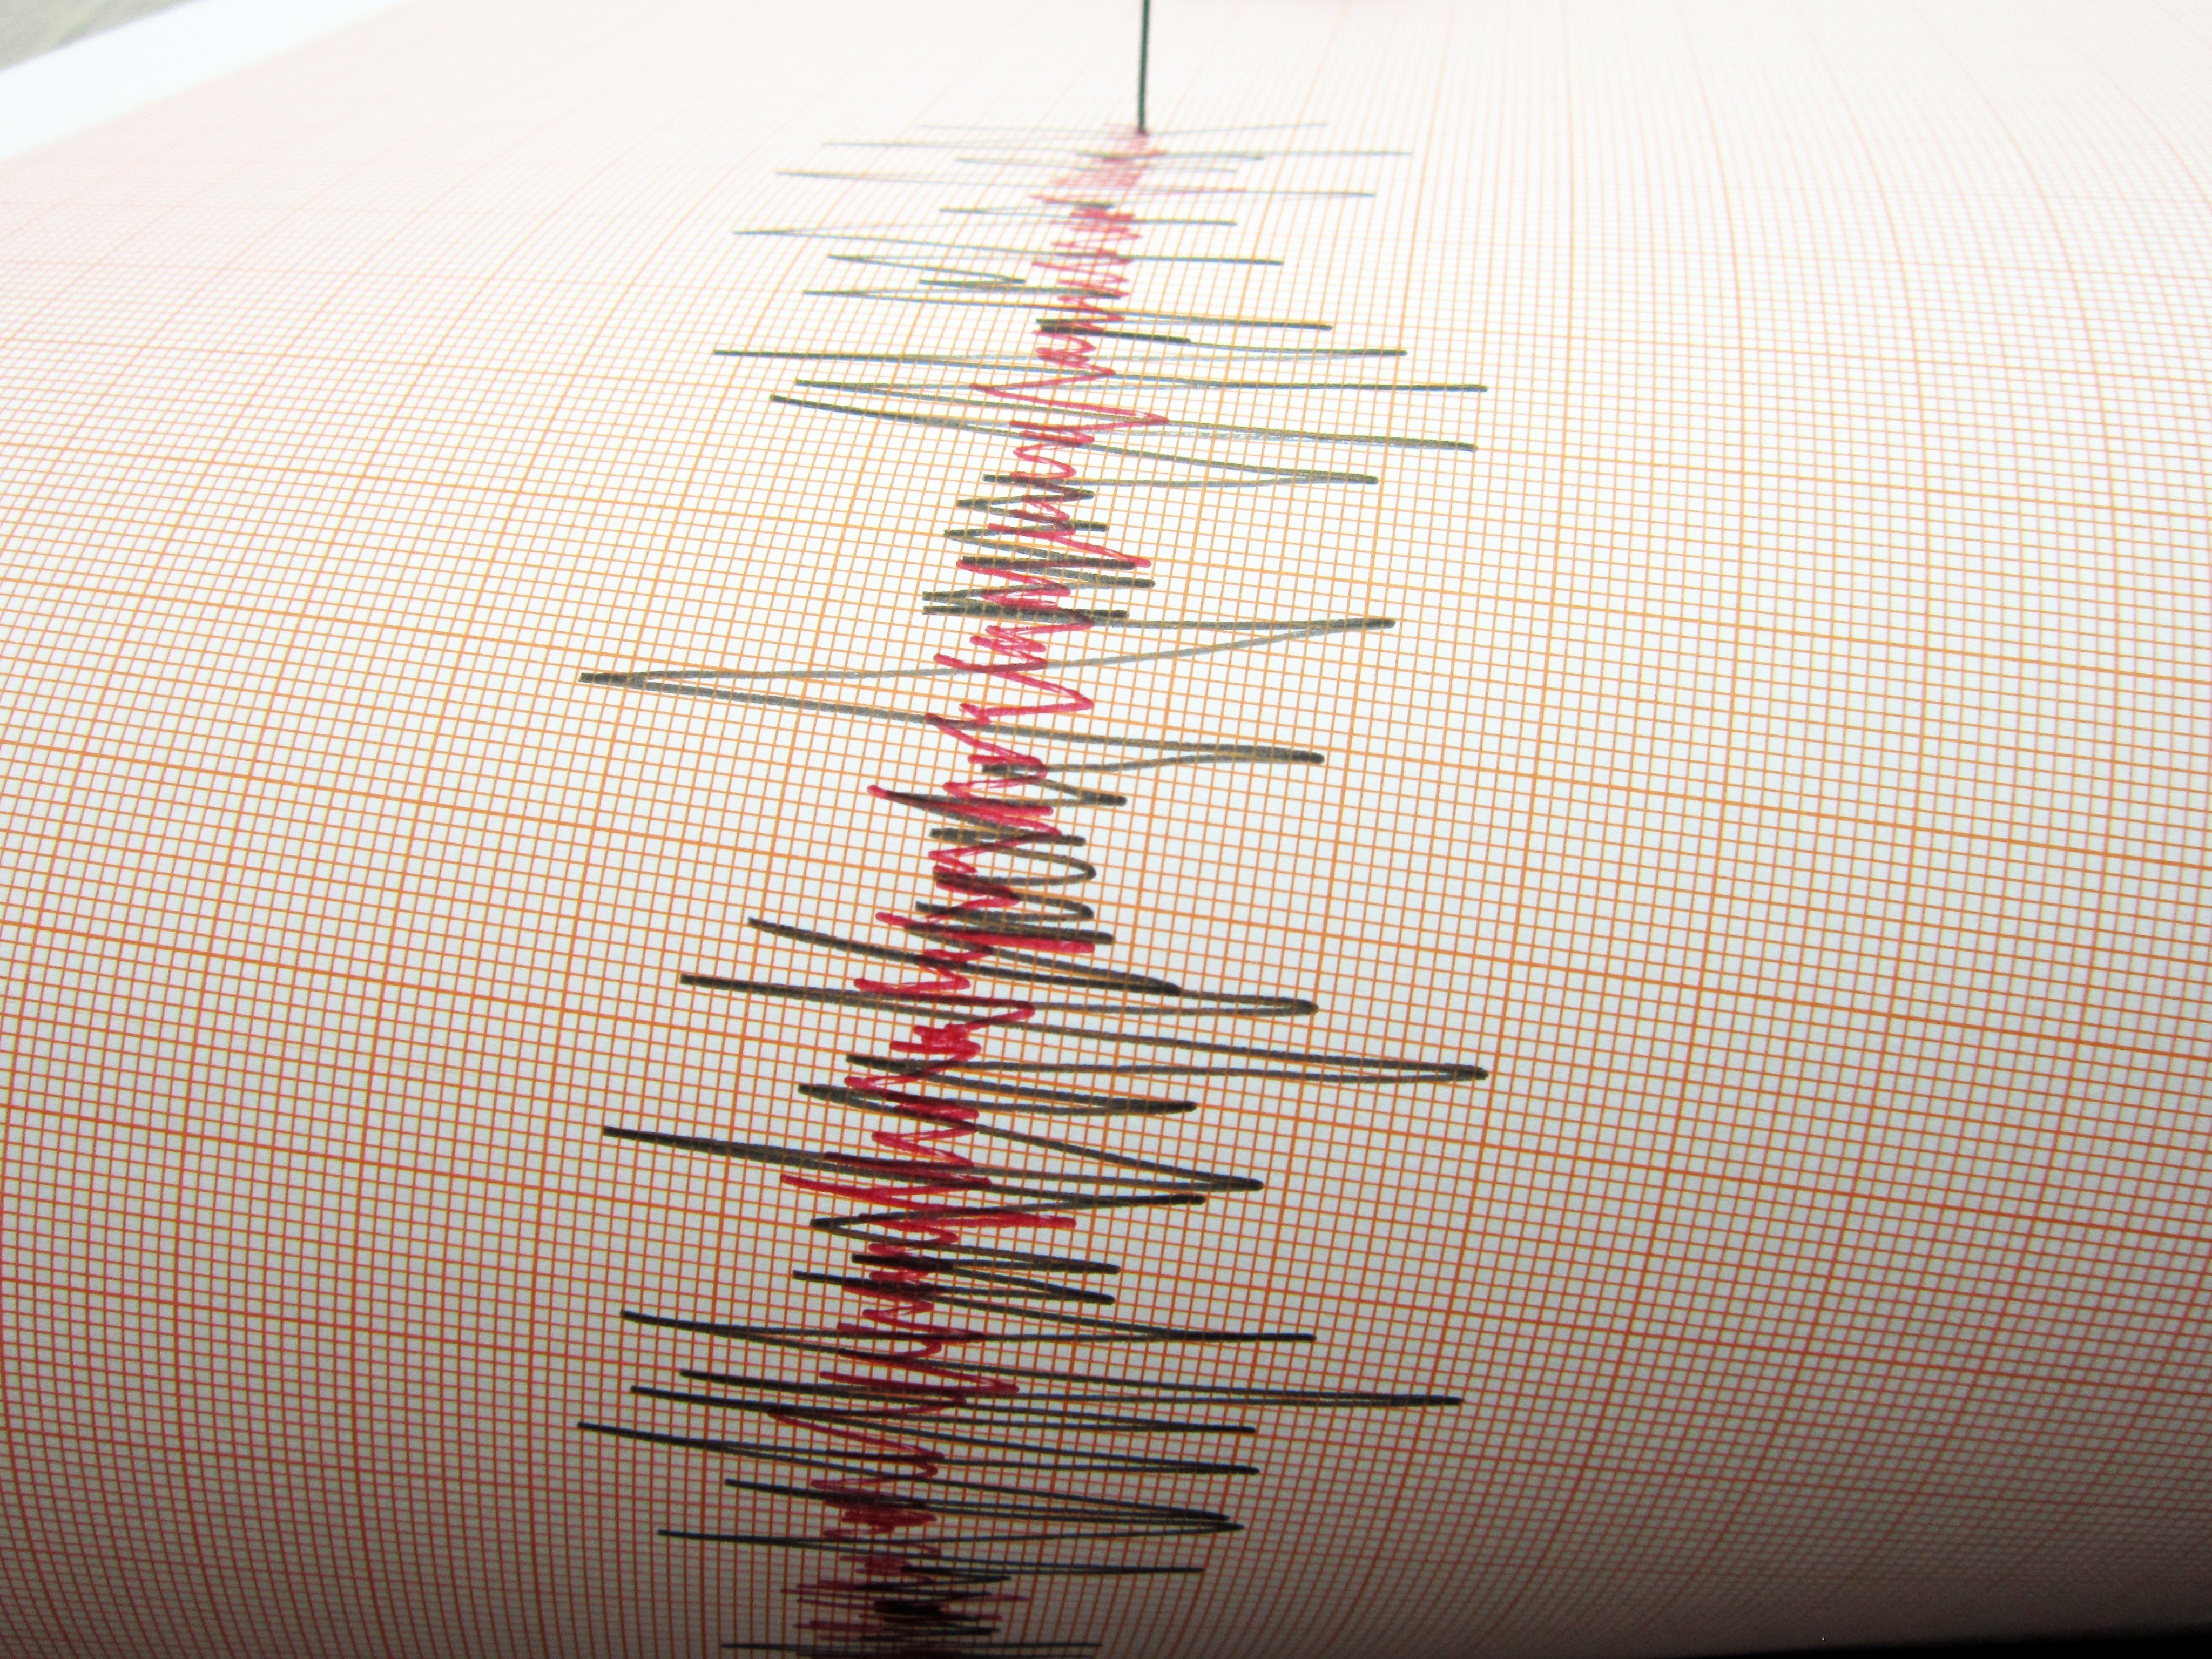 The only seismic activity to cause structural damage in Hong Kong was a 7.2 magnitude earthquake that struck Shantou, about 300km away, in 1918 during Lunar New Year celebrations. Photo: Shutterstock 